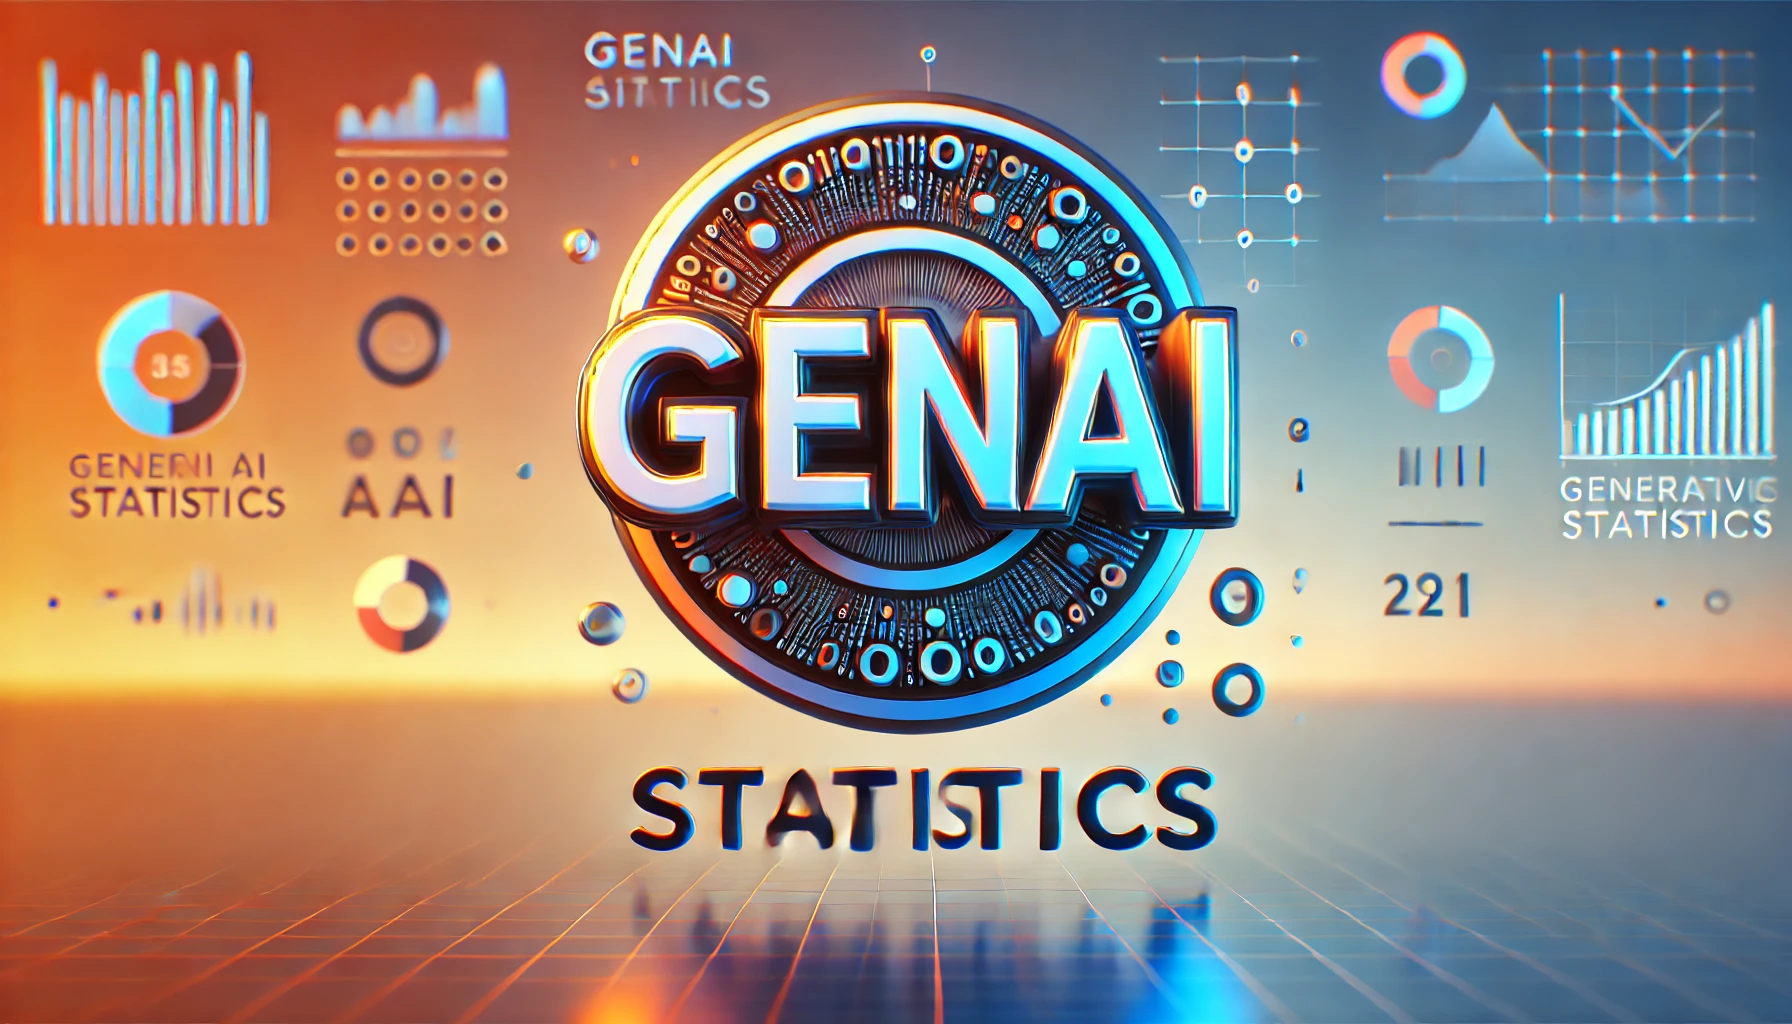 GenAI Statistics By Region, Function, Market Share And Worldwide Use Of Gen AI